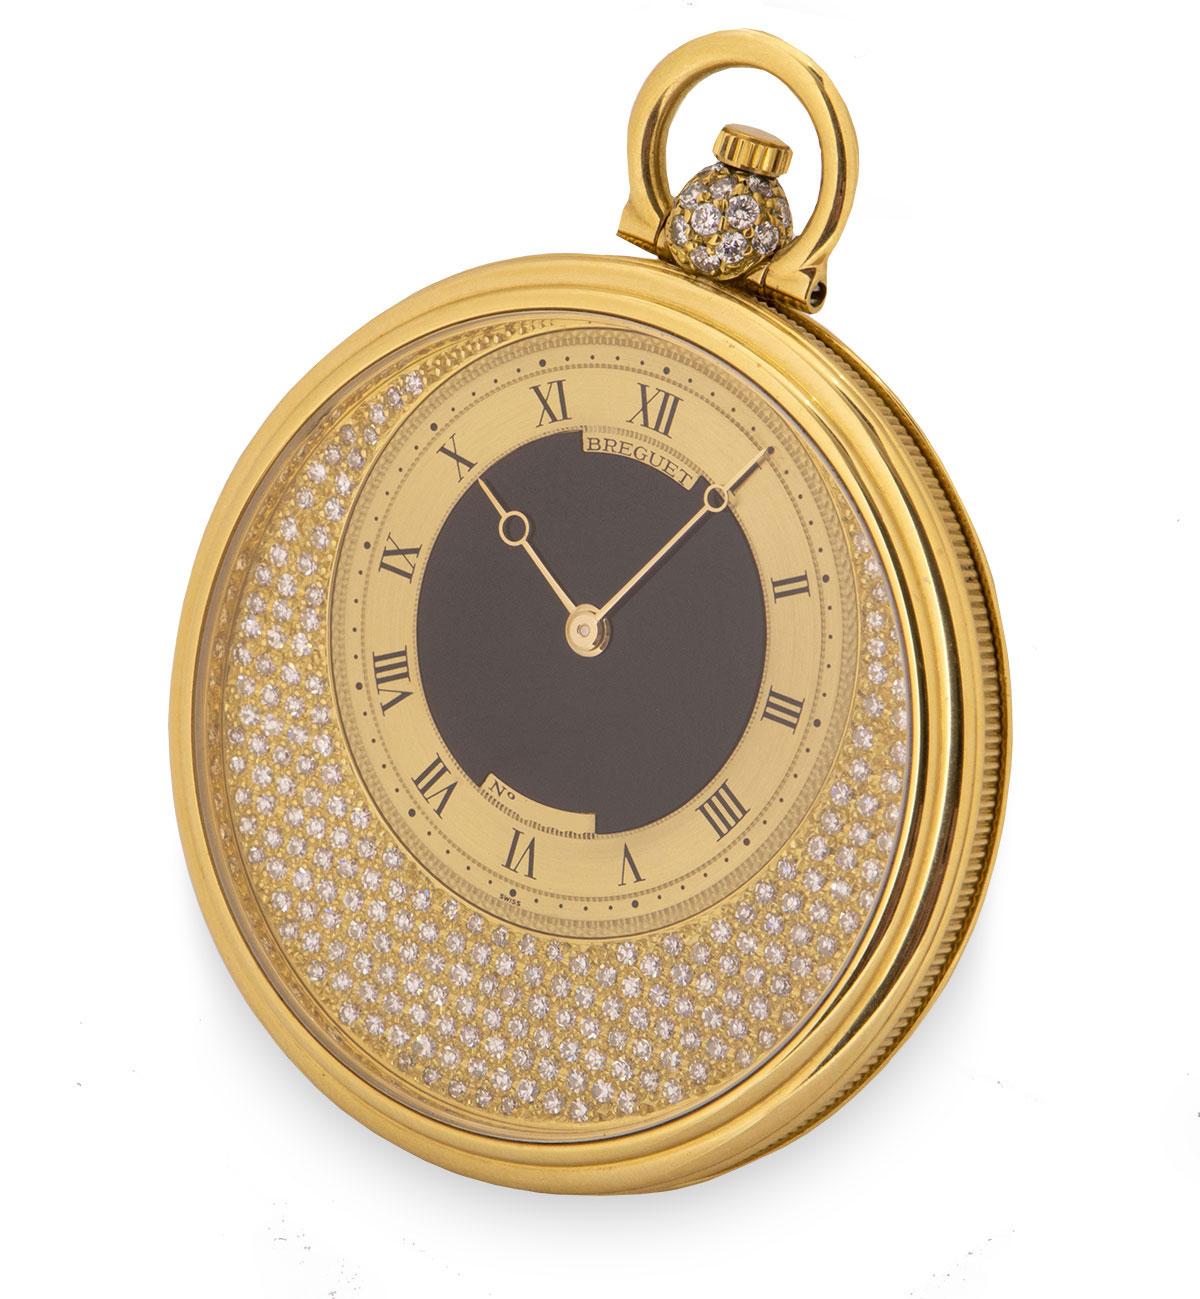 Breguet. A Yellow Gold Keyless Lever Onyx Centre Pave Diamond Set Dial Dress Pocket Watch C1980 with an 18ct yellow gold matching chain.

Dial: The beautiful pave set diamond dial with black onyx centre and gold chapter ring with Roman Numeral outer